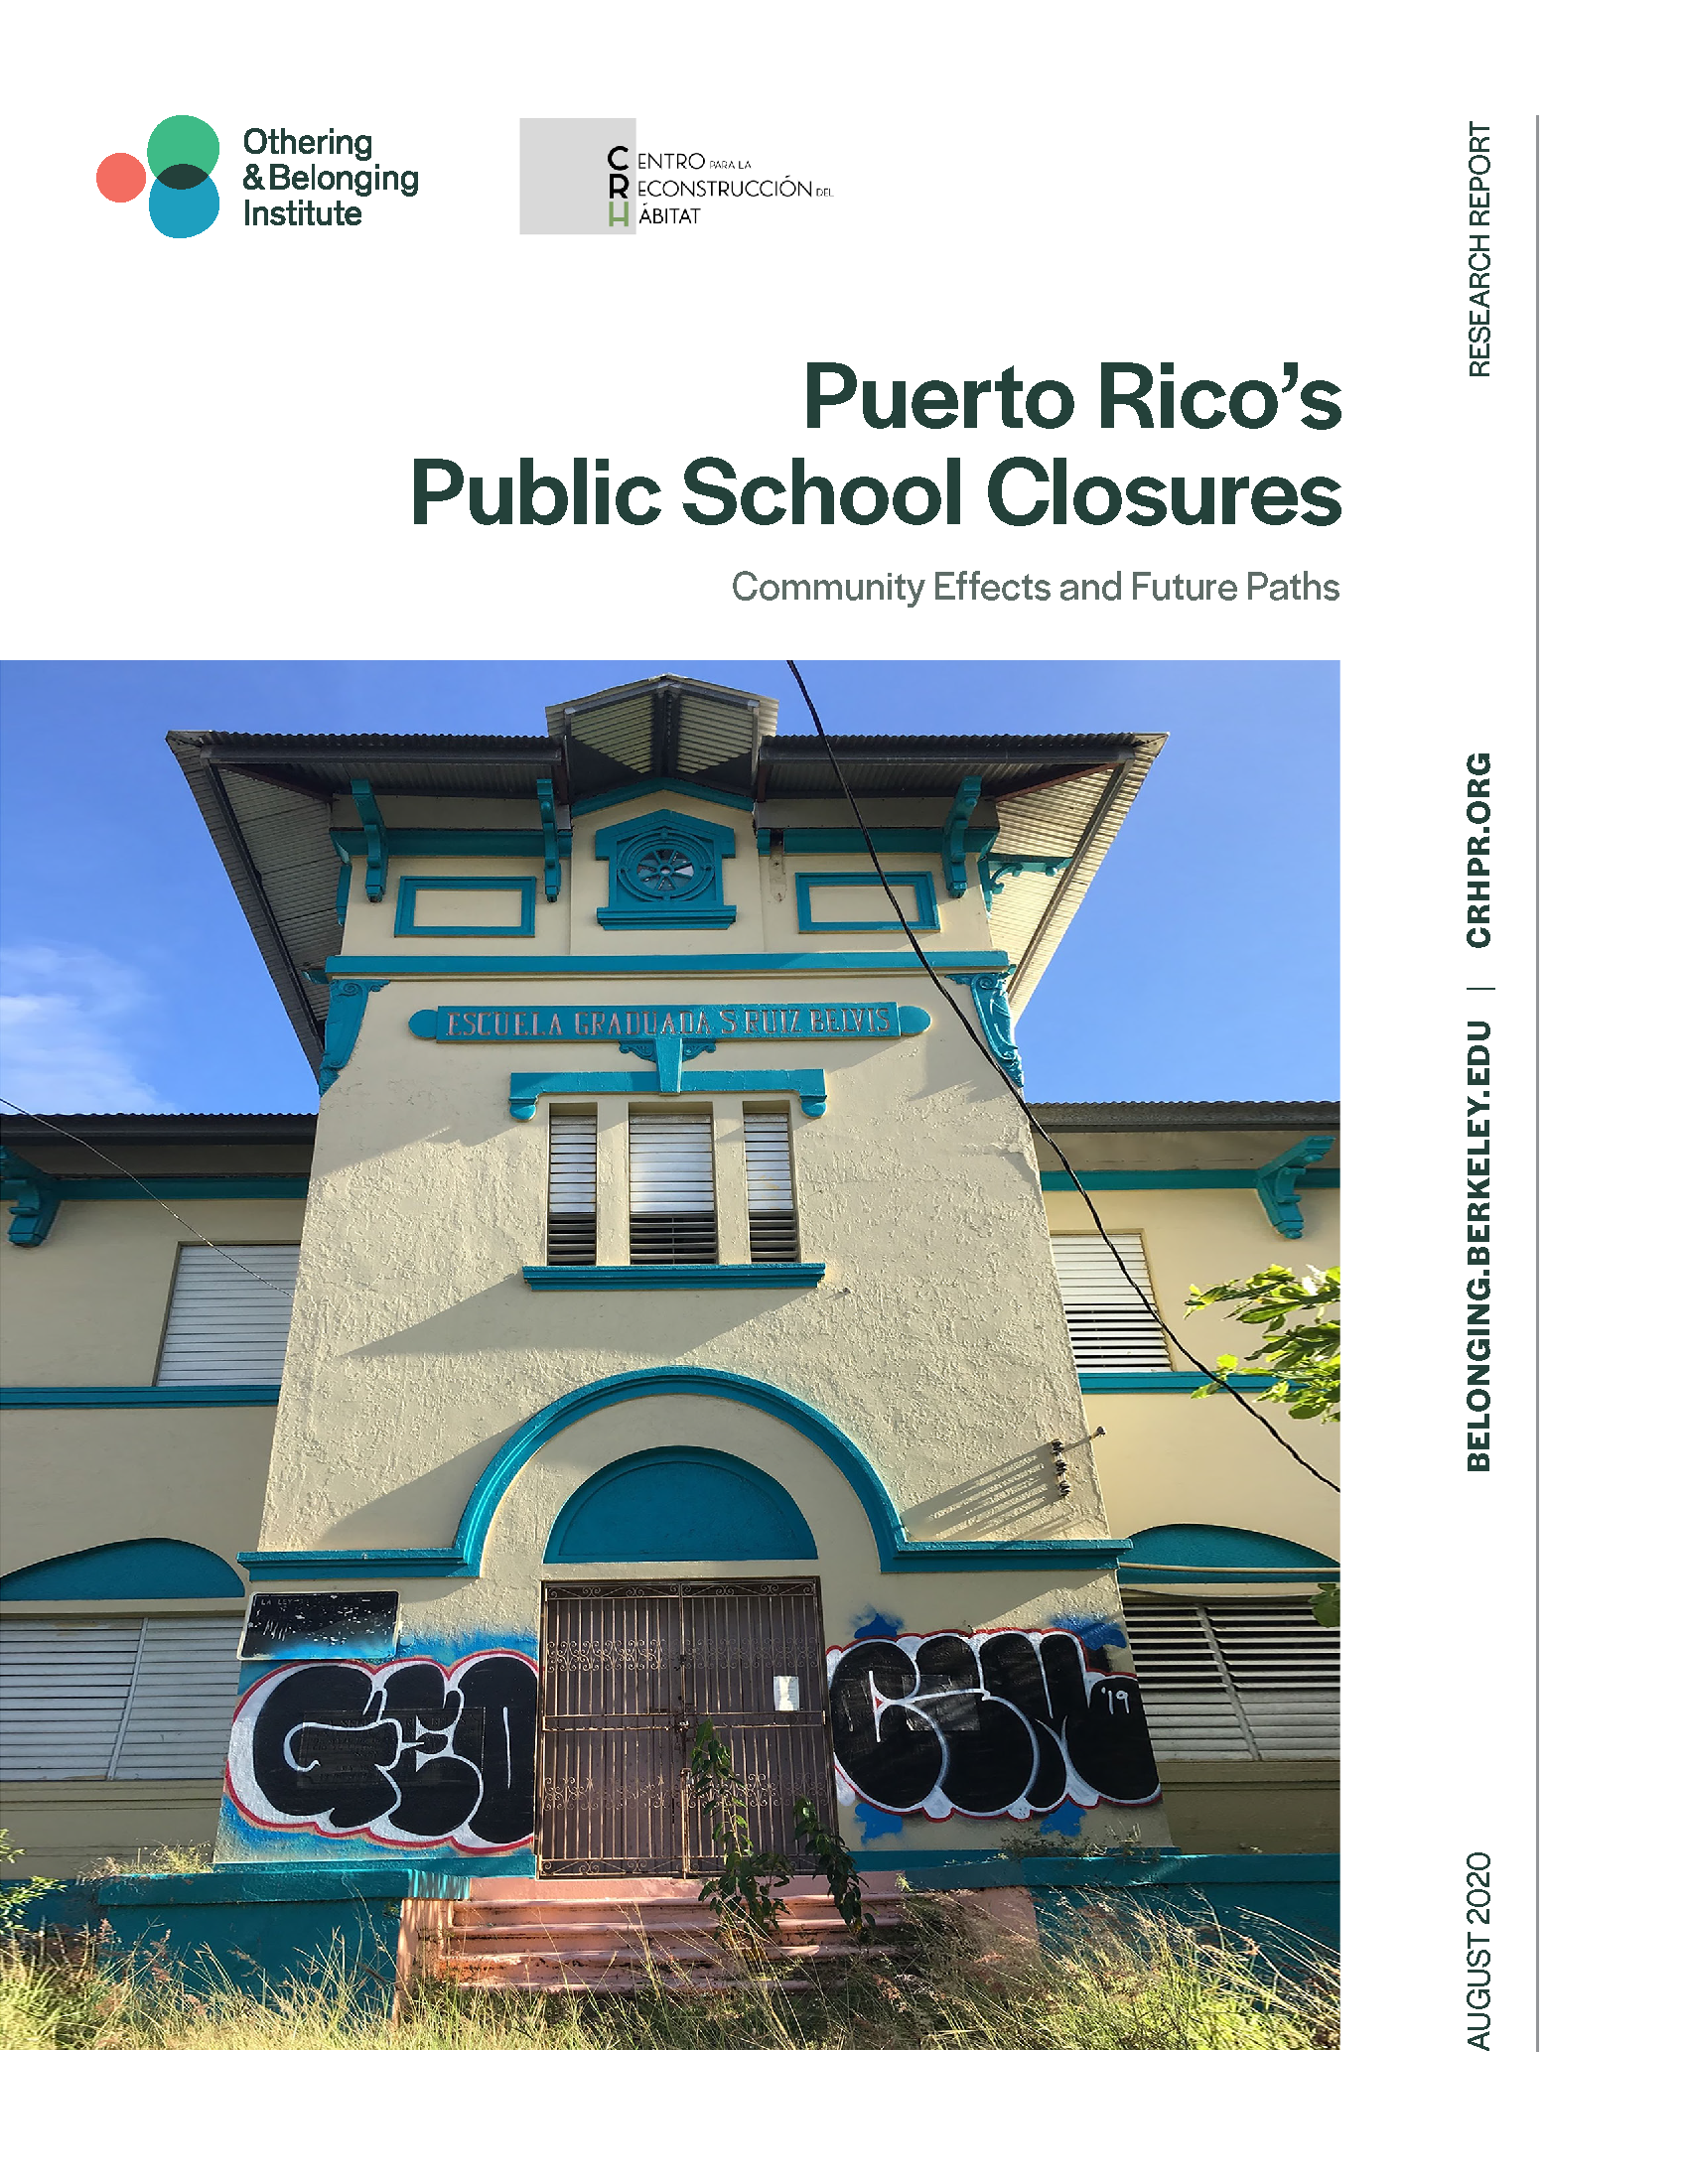 Cover of Puerto Rico report showing abandoned school